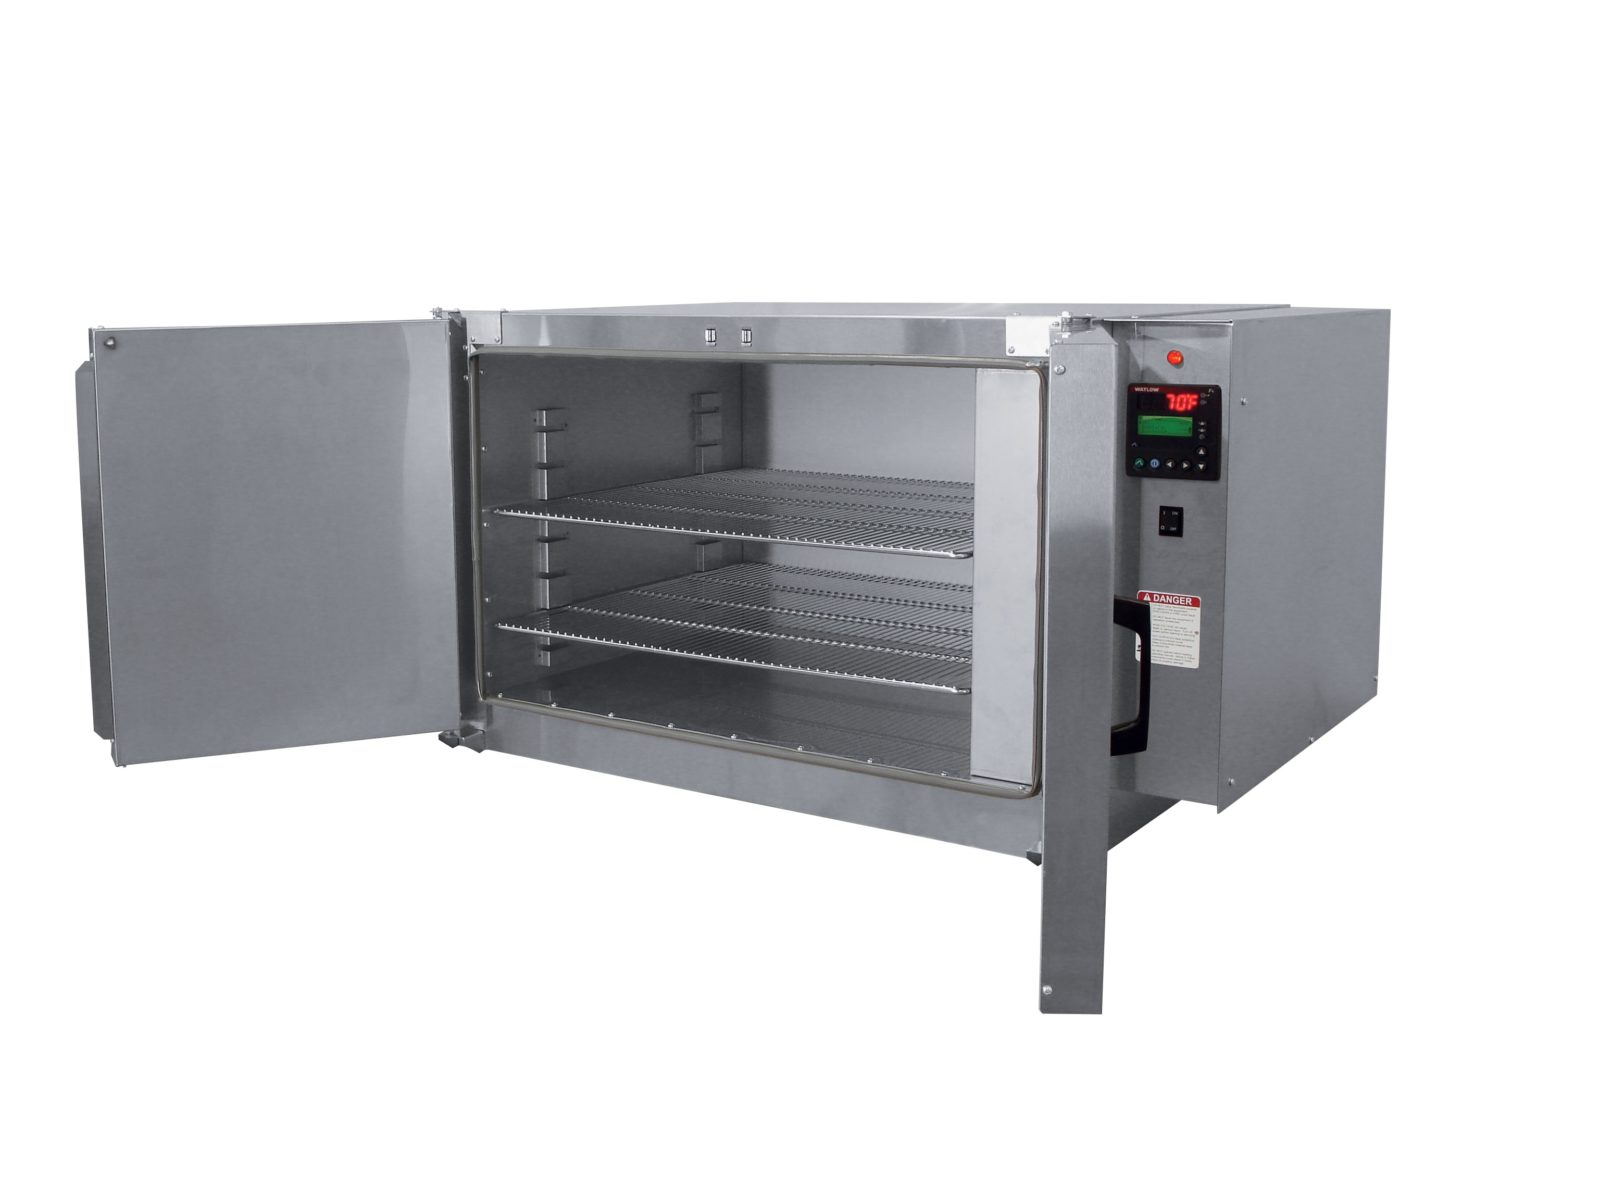 A Grieve convection heating oven with digital controls and stainless steel construction.